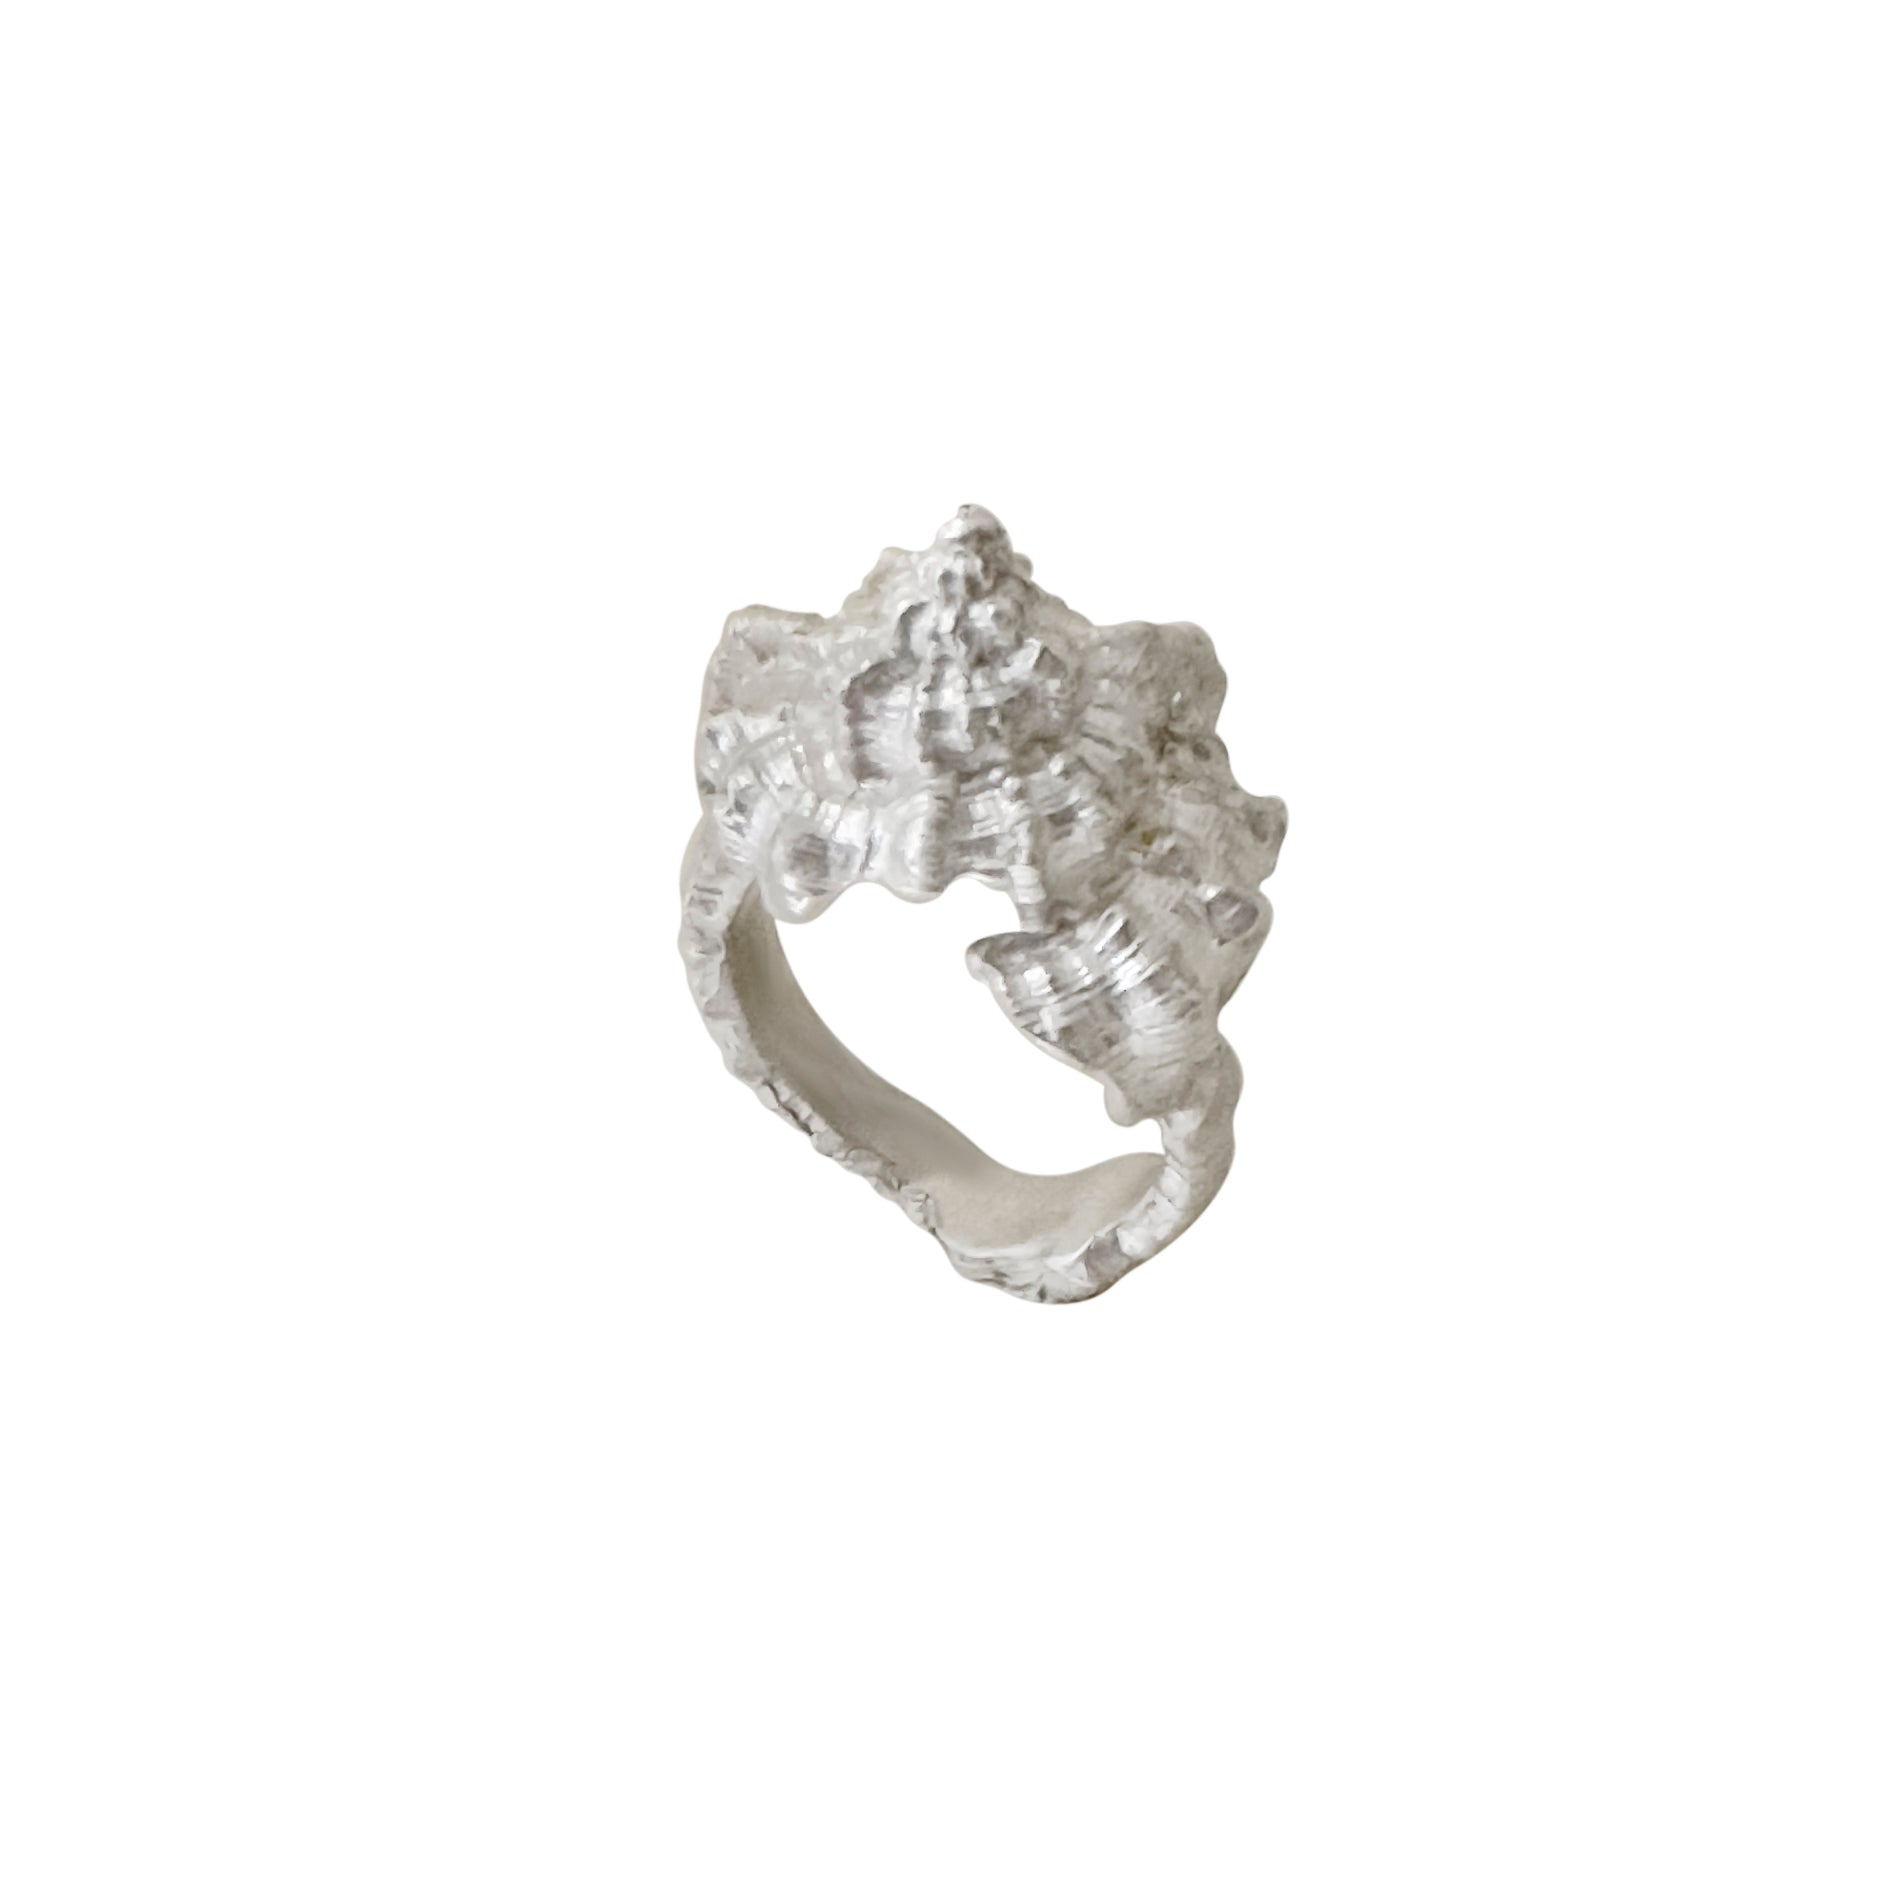 Unearthed- the limited edition broken seashell ring